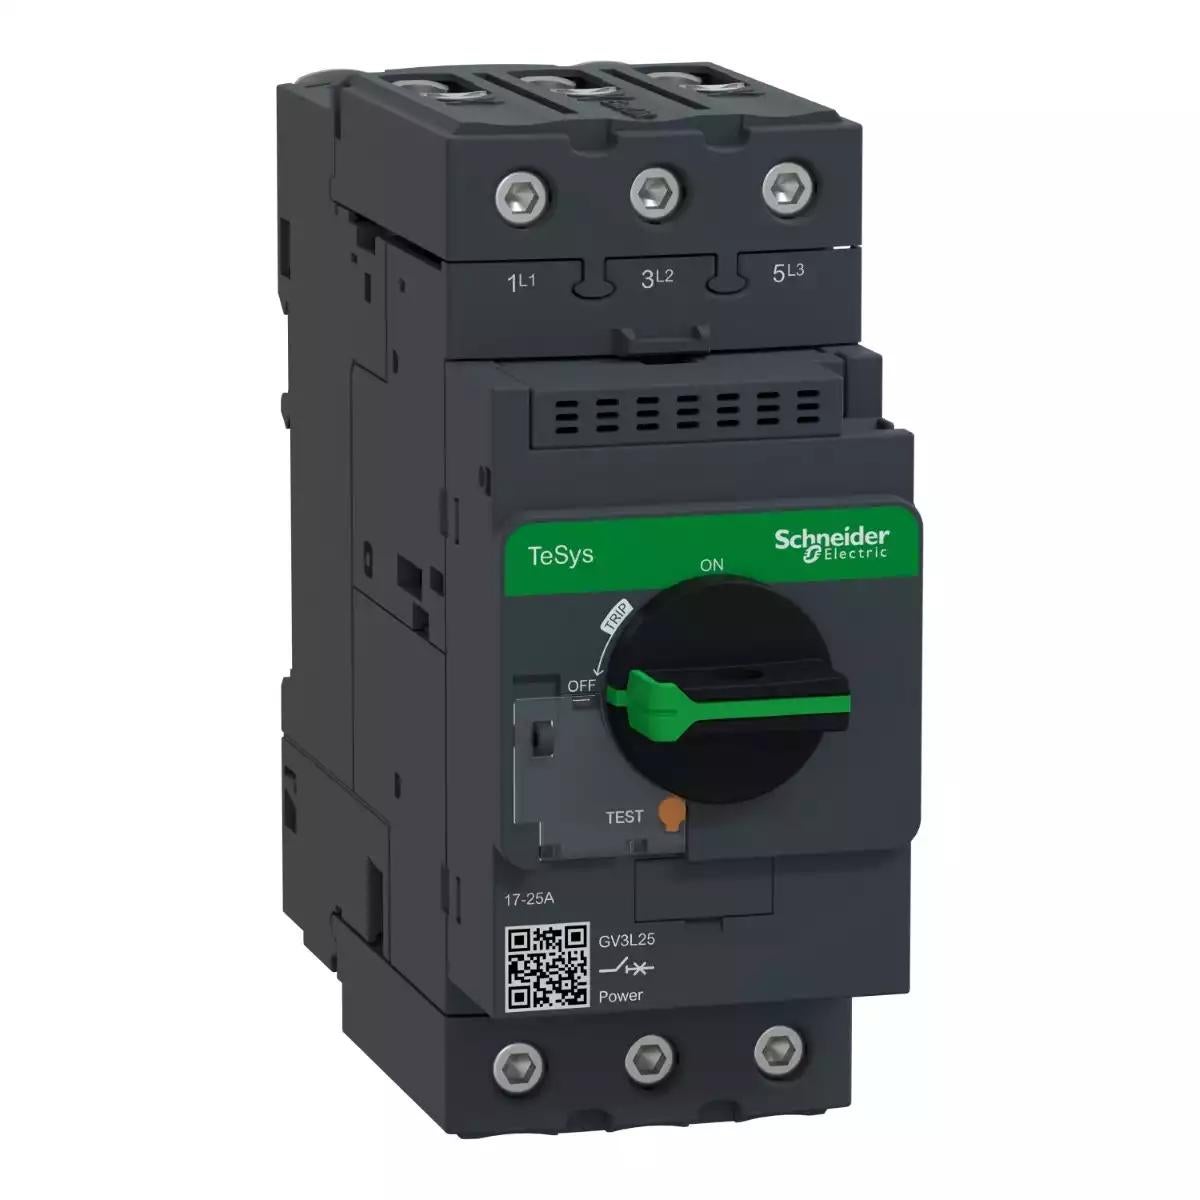 Schneider Electric TeSys GV3 - Circuit breaker - magnetic - 25 A - EverLink BTR connectors